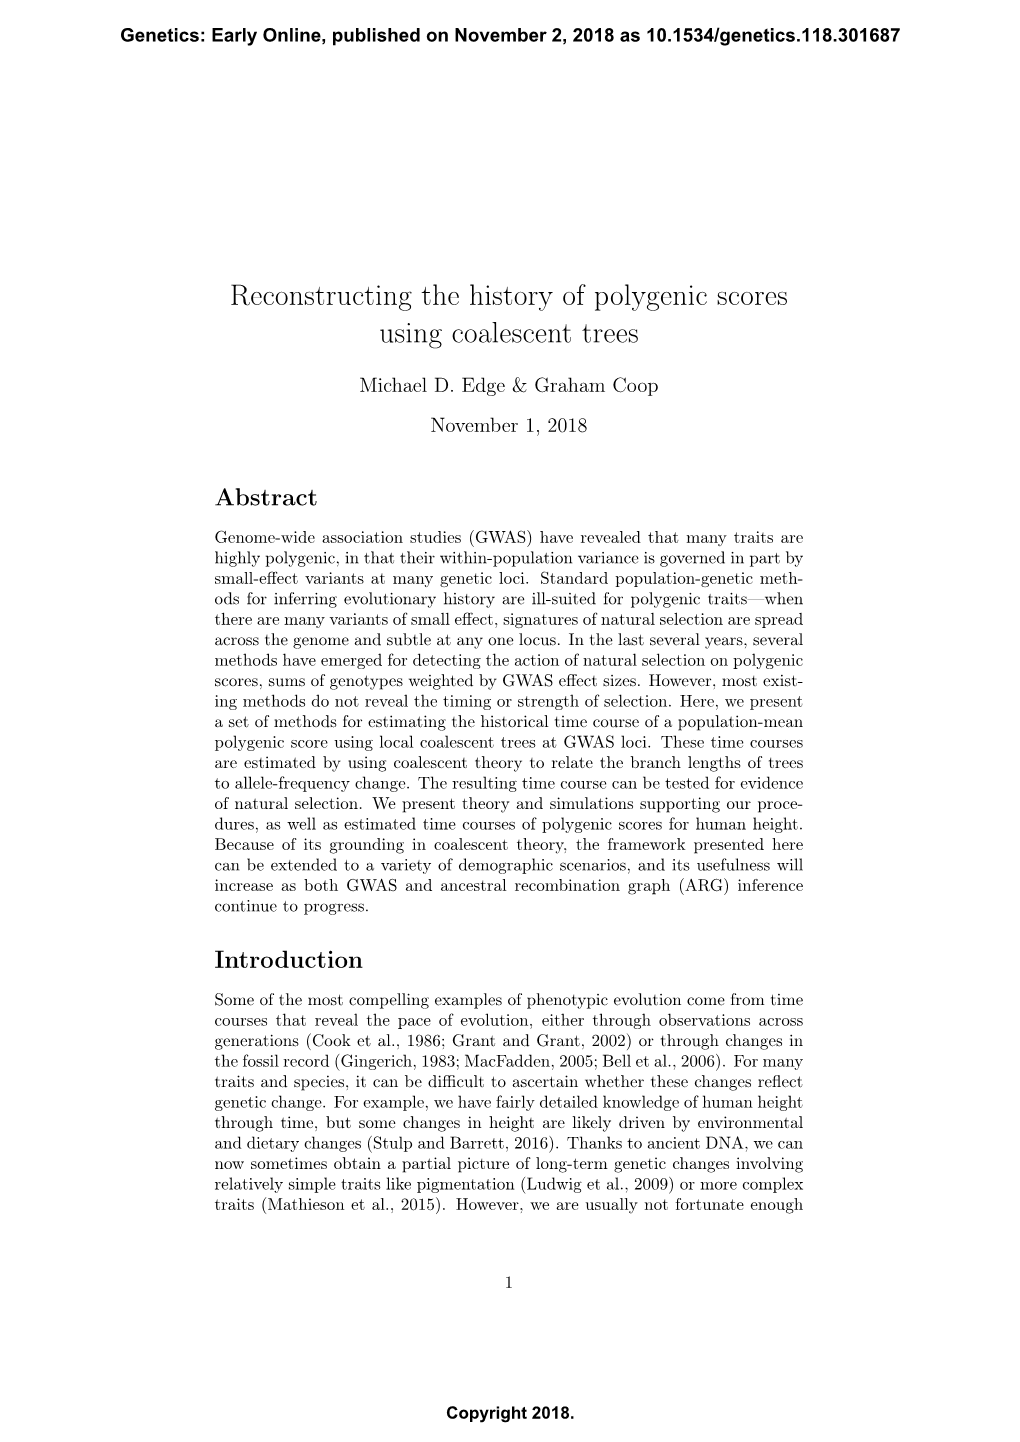 Reconstructing the History of Polygenic Scores Using Coalescent Trees